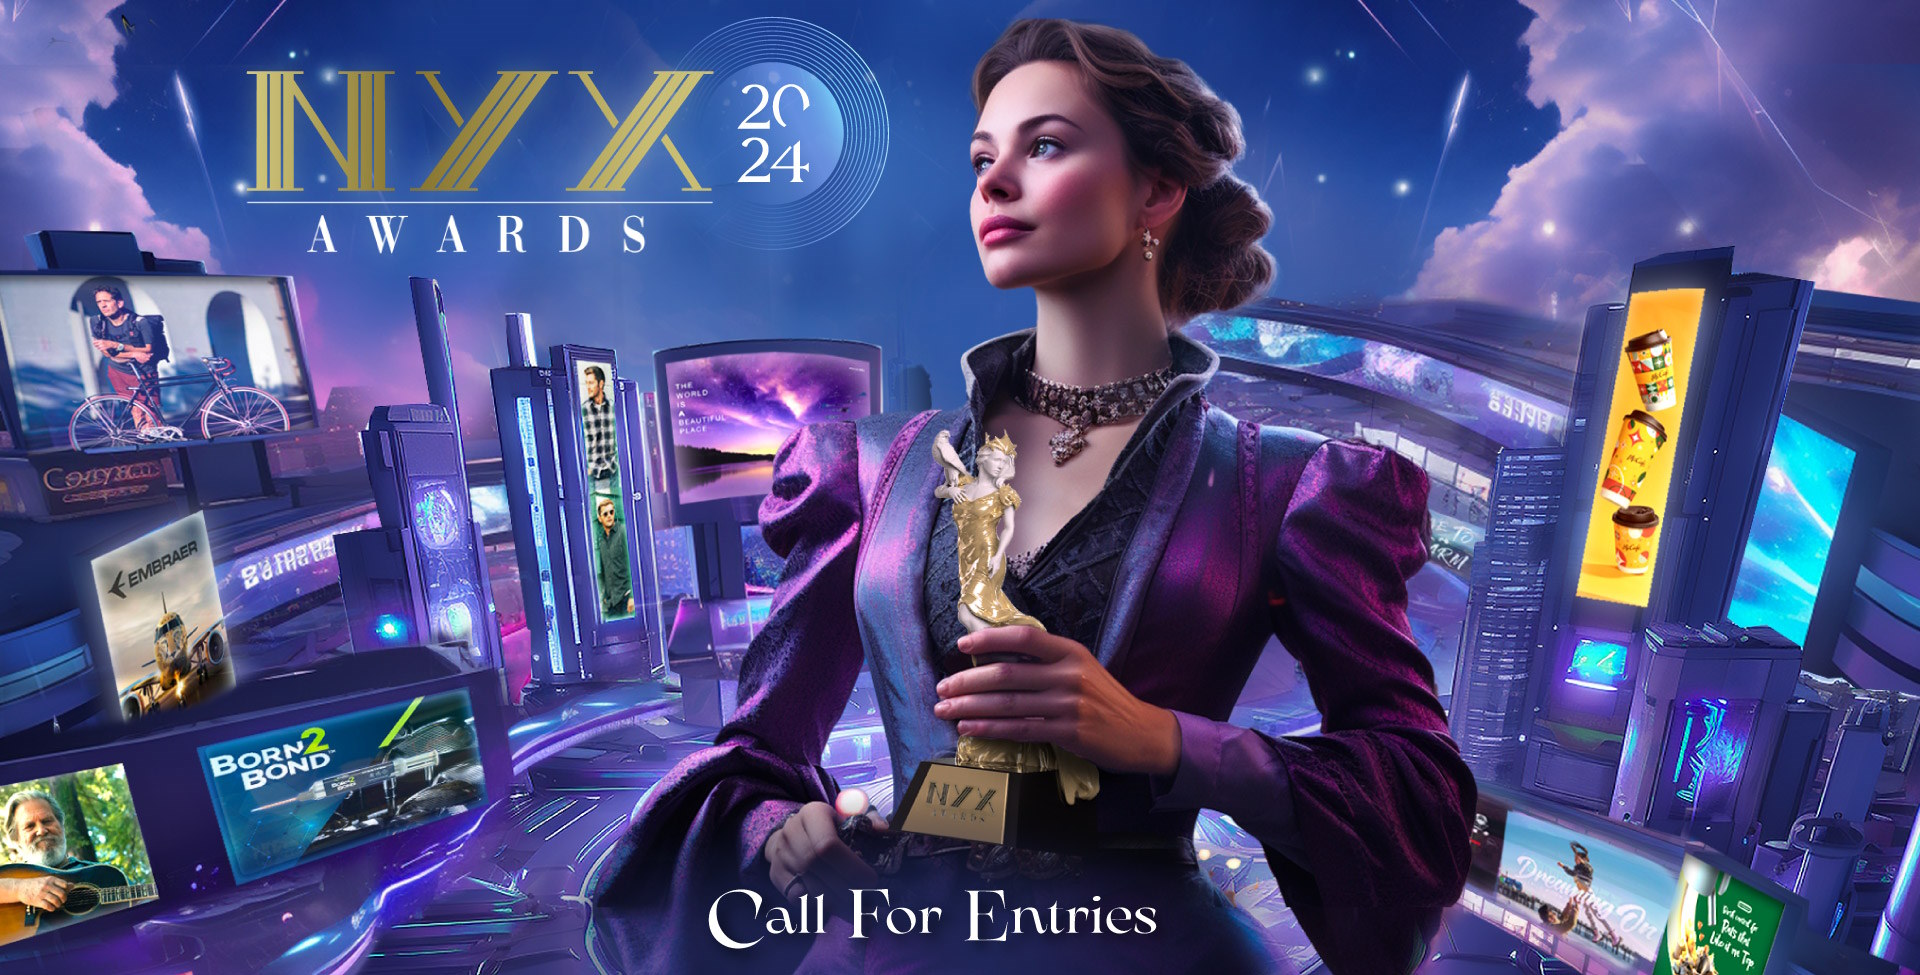 2021 NYX Game Awards Winners Announced